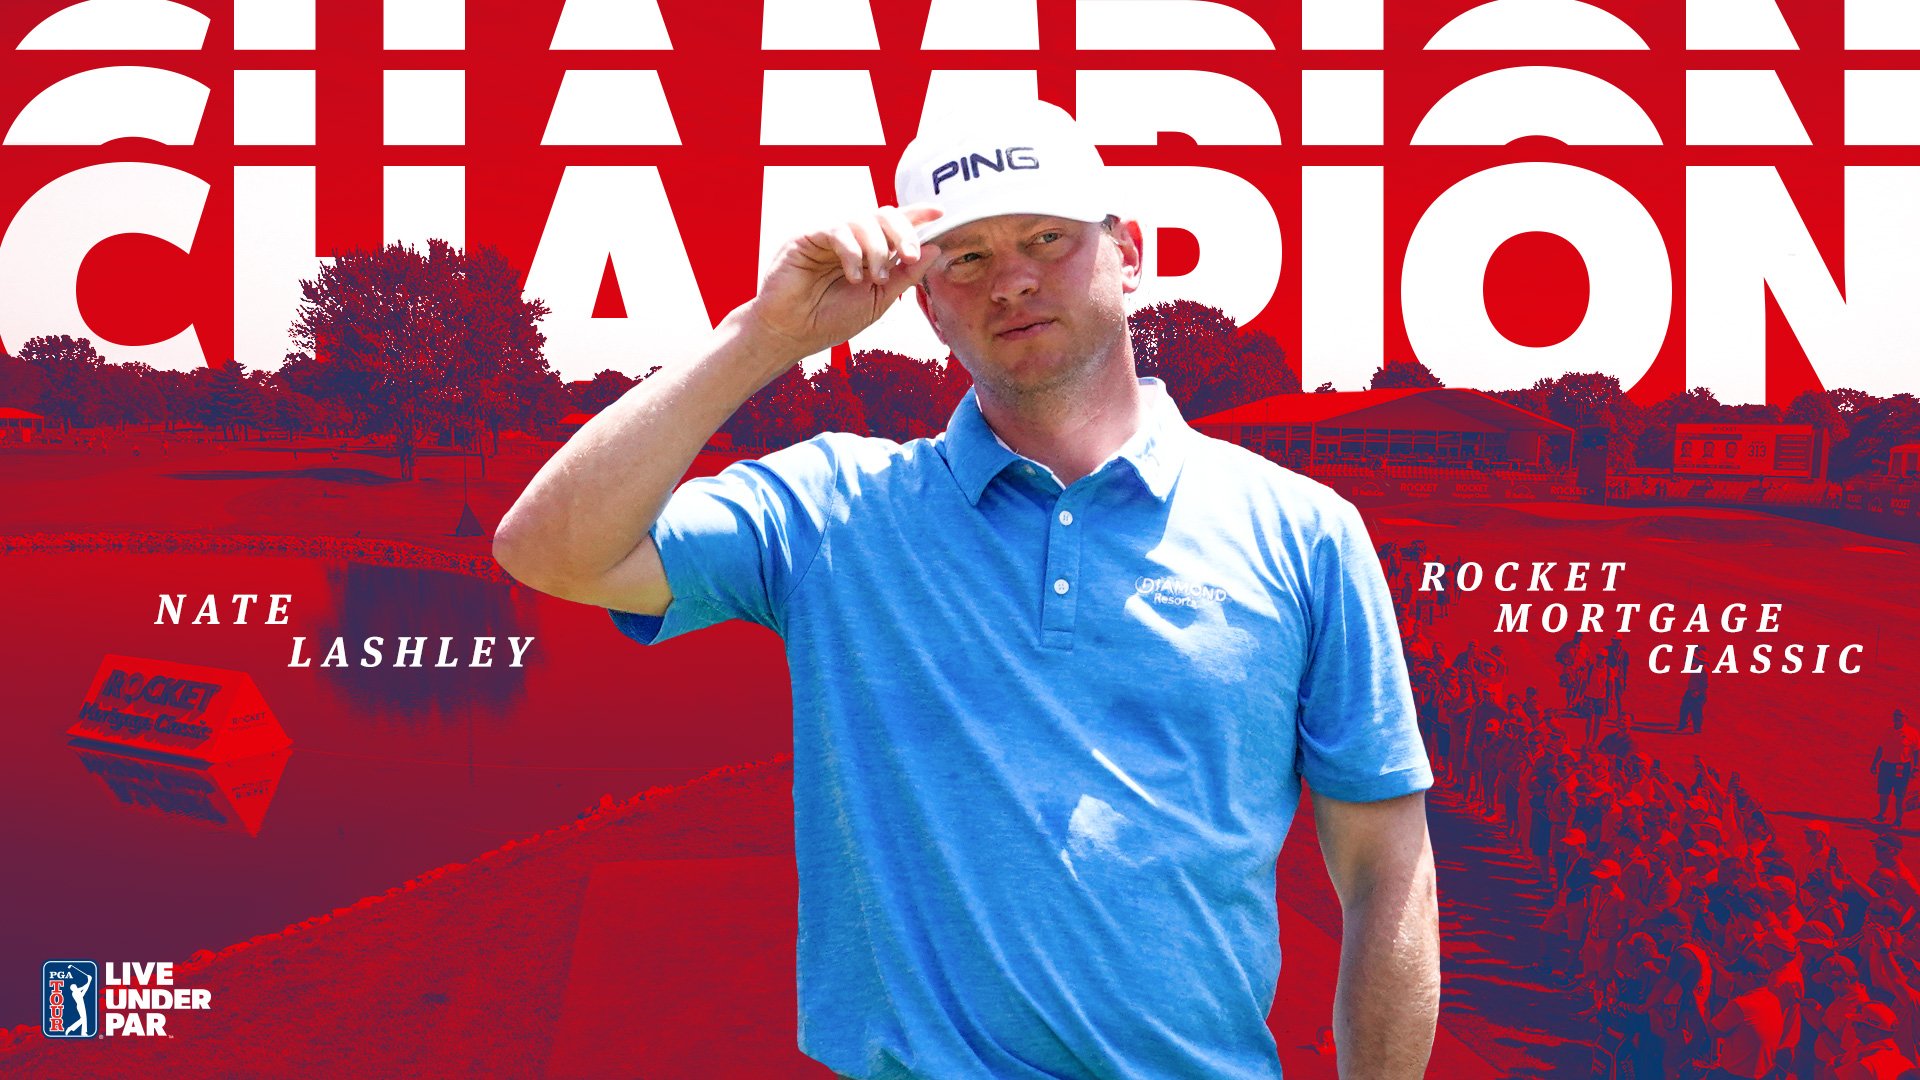 Nate Lashley đăng quang Rocket Mortgage Classic bằng chiến thắng wire-to-wire